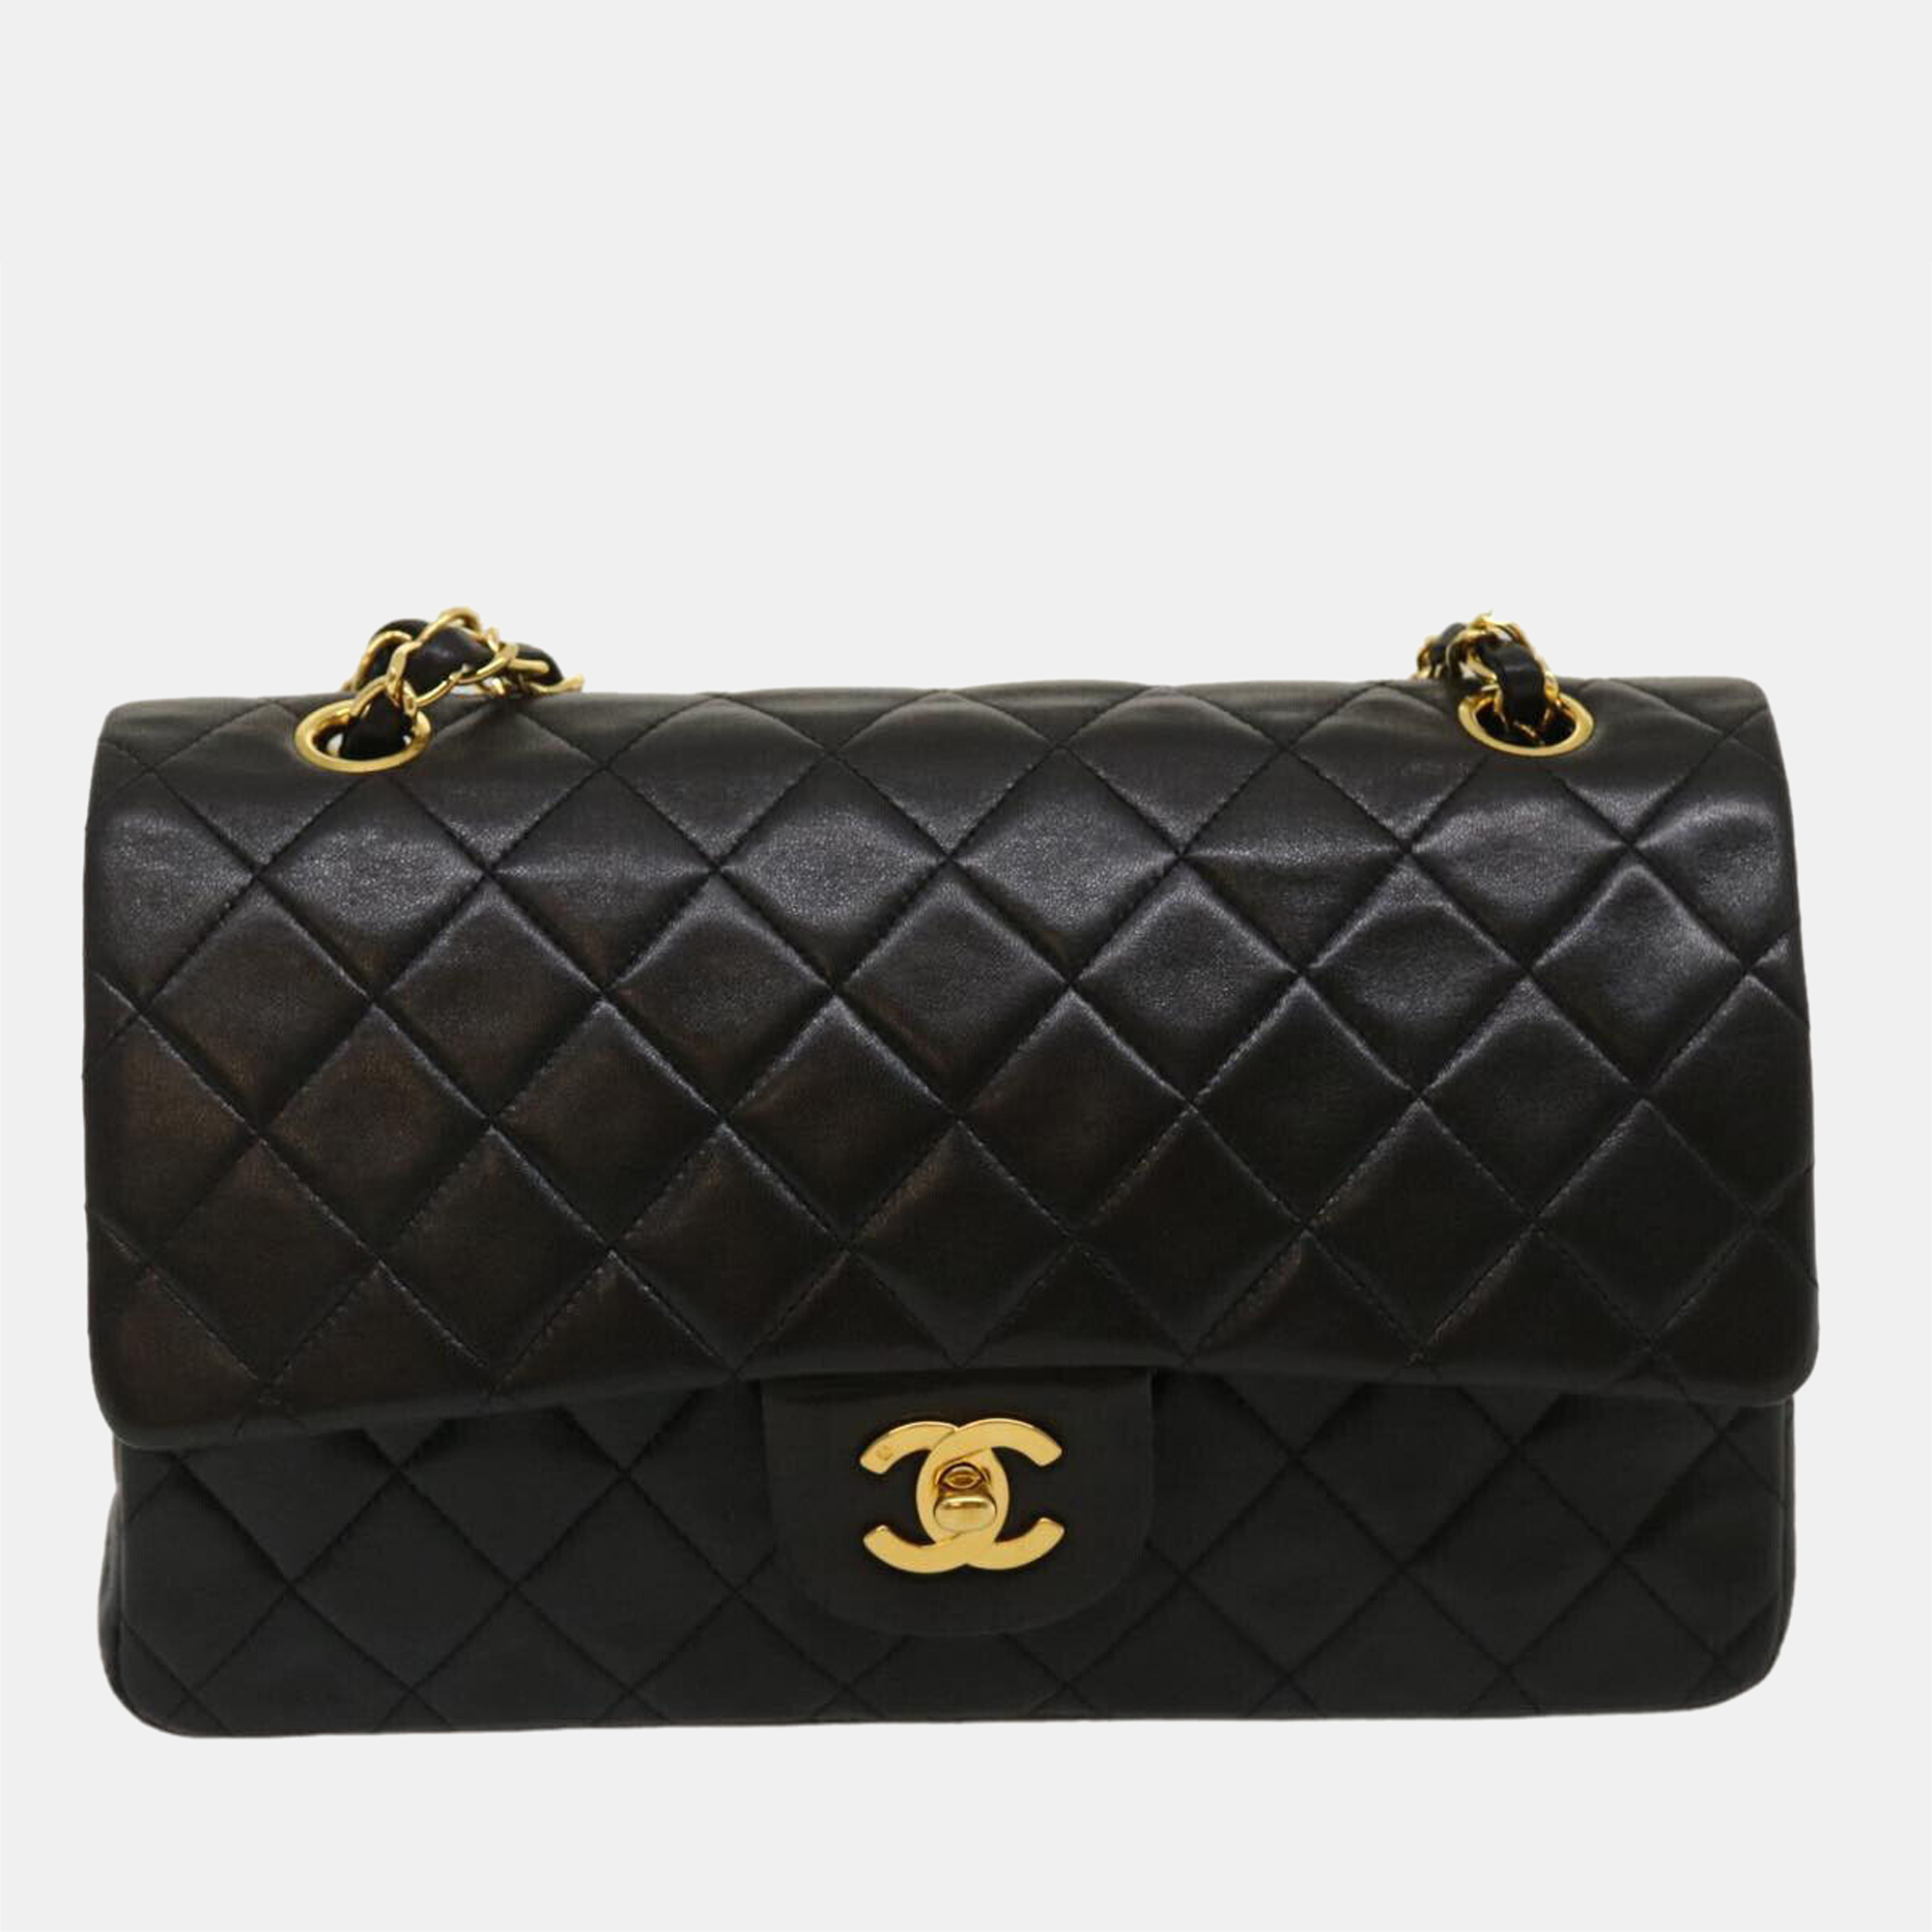 Pre-owned Chanel Black Lambskin Leather Classic Double Flap Bag